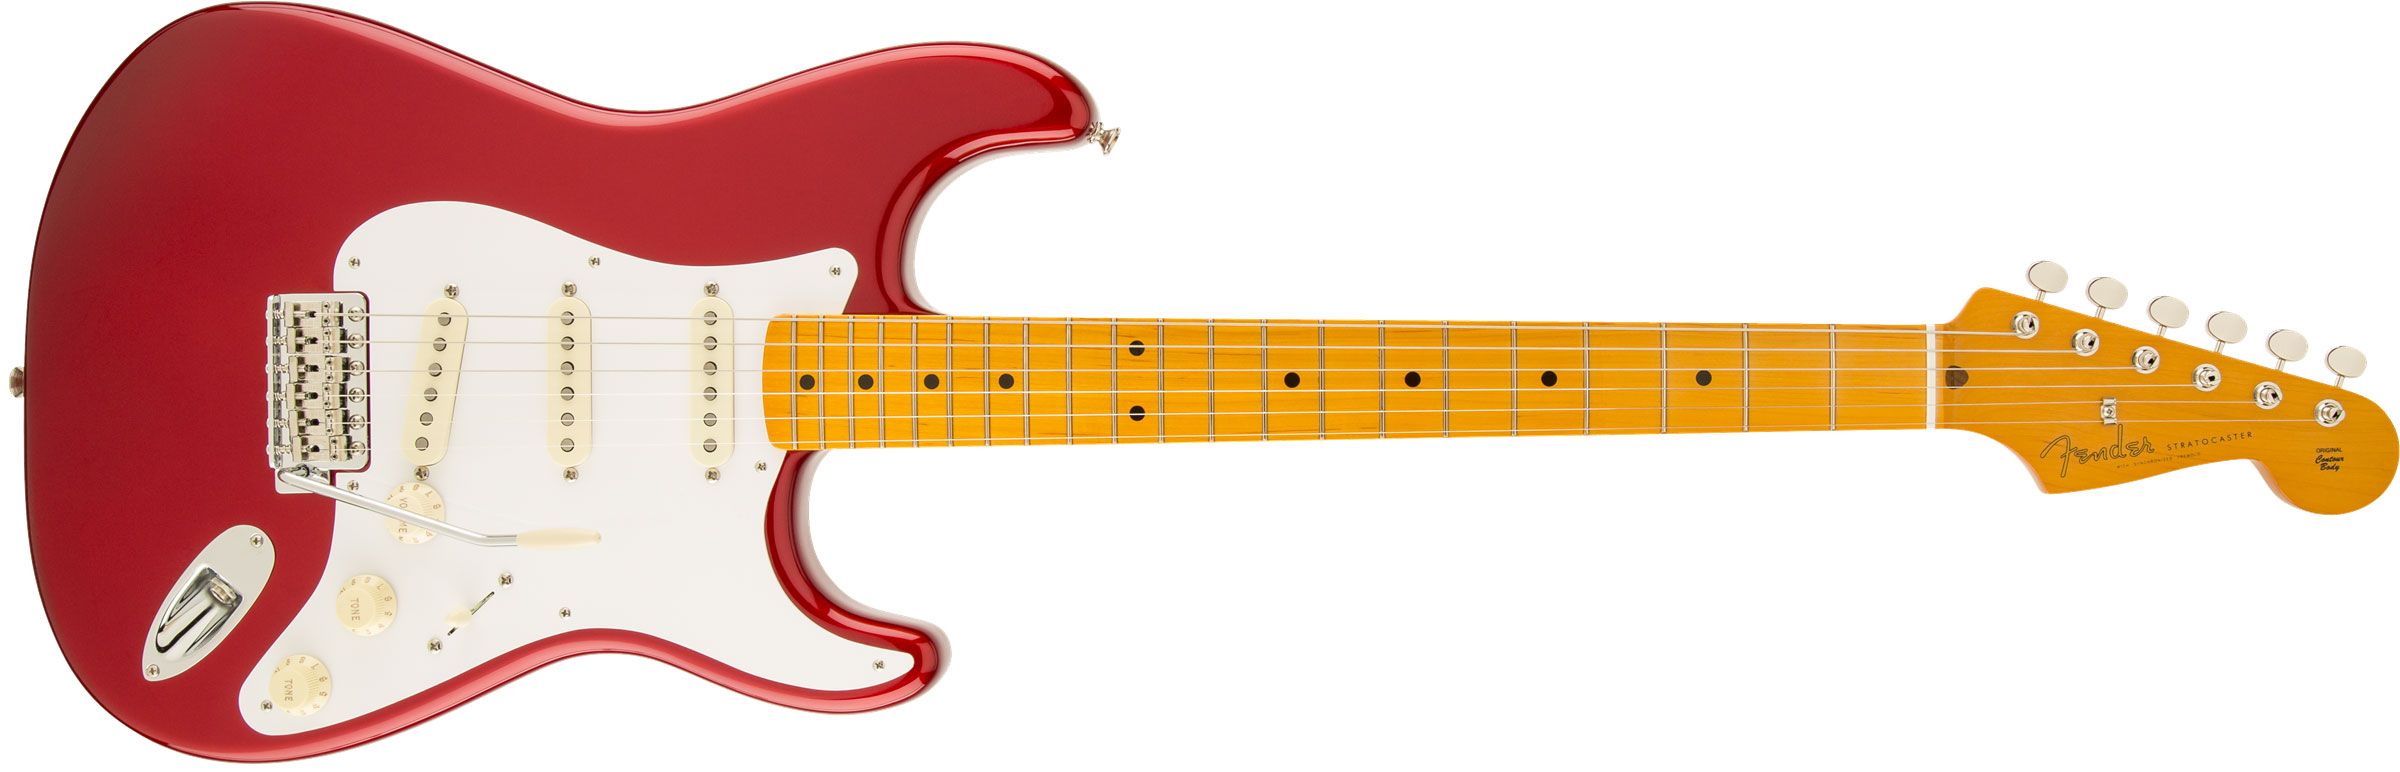 GUITARRA FENDER 50S STRATOCASTER LACQUER MN 014-0061-709 CANDY APPLE RED